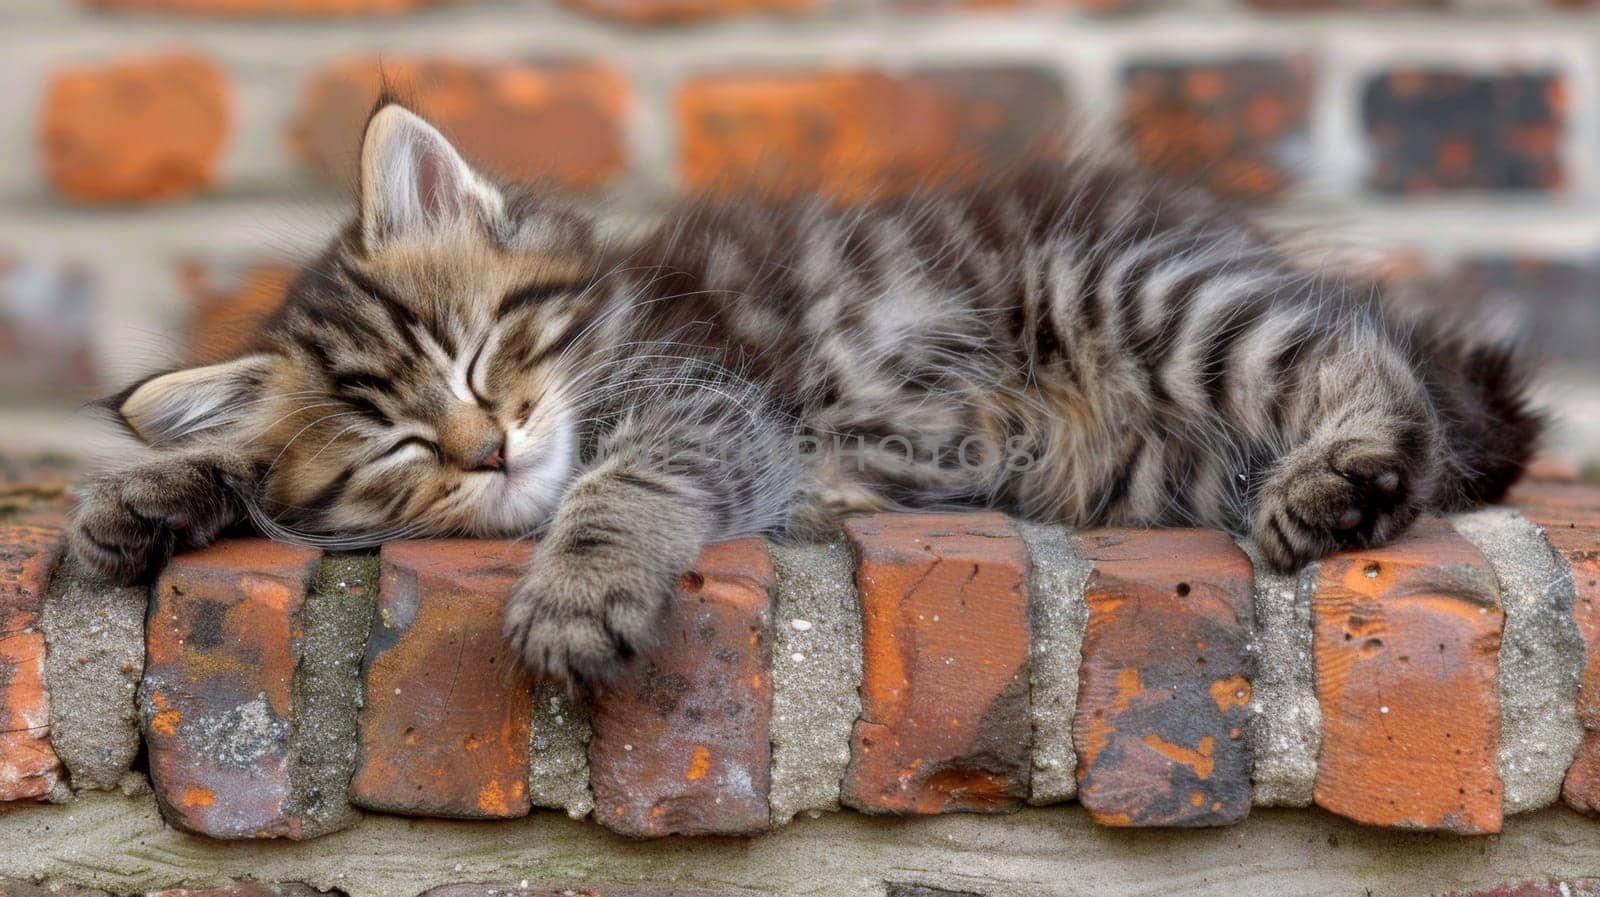 A small kitten sleeping on a brick wall with bricks around it, AI by starush